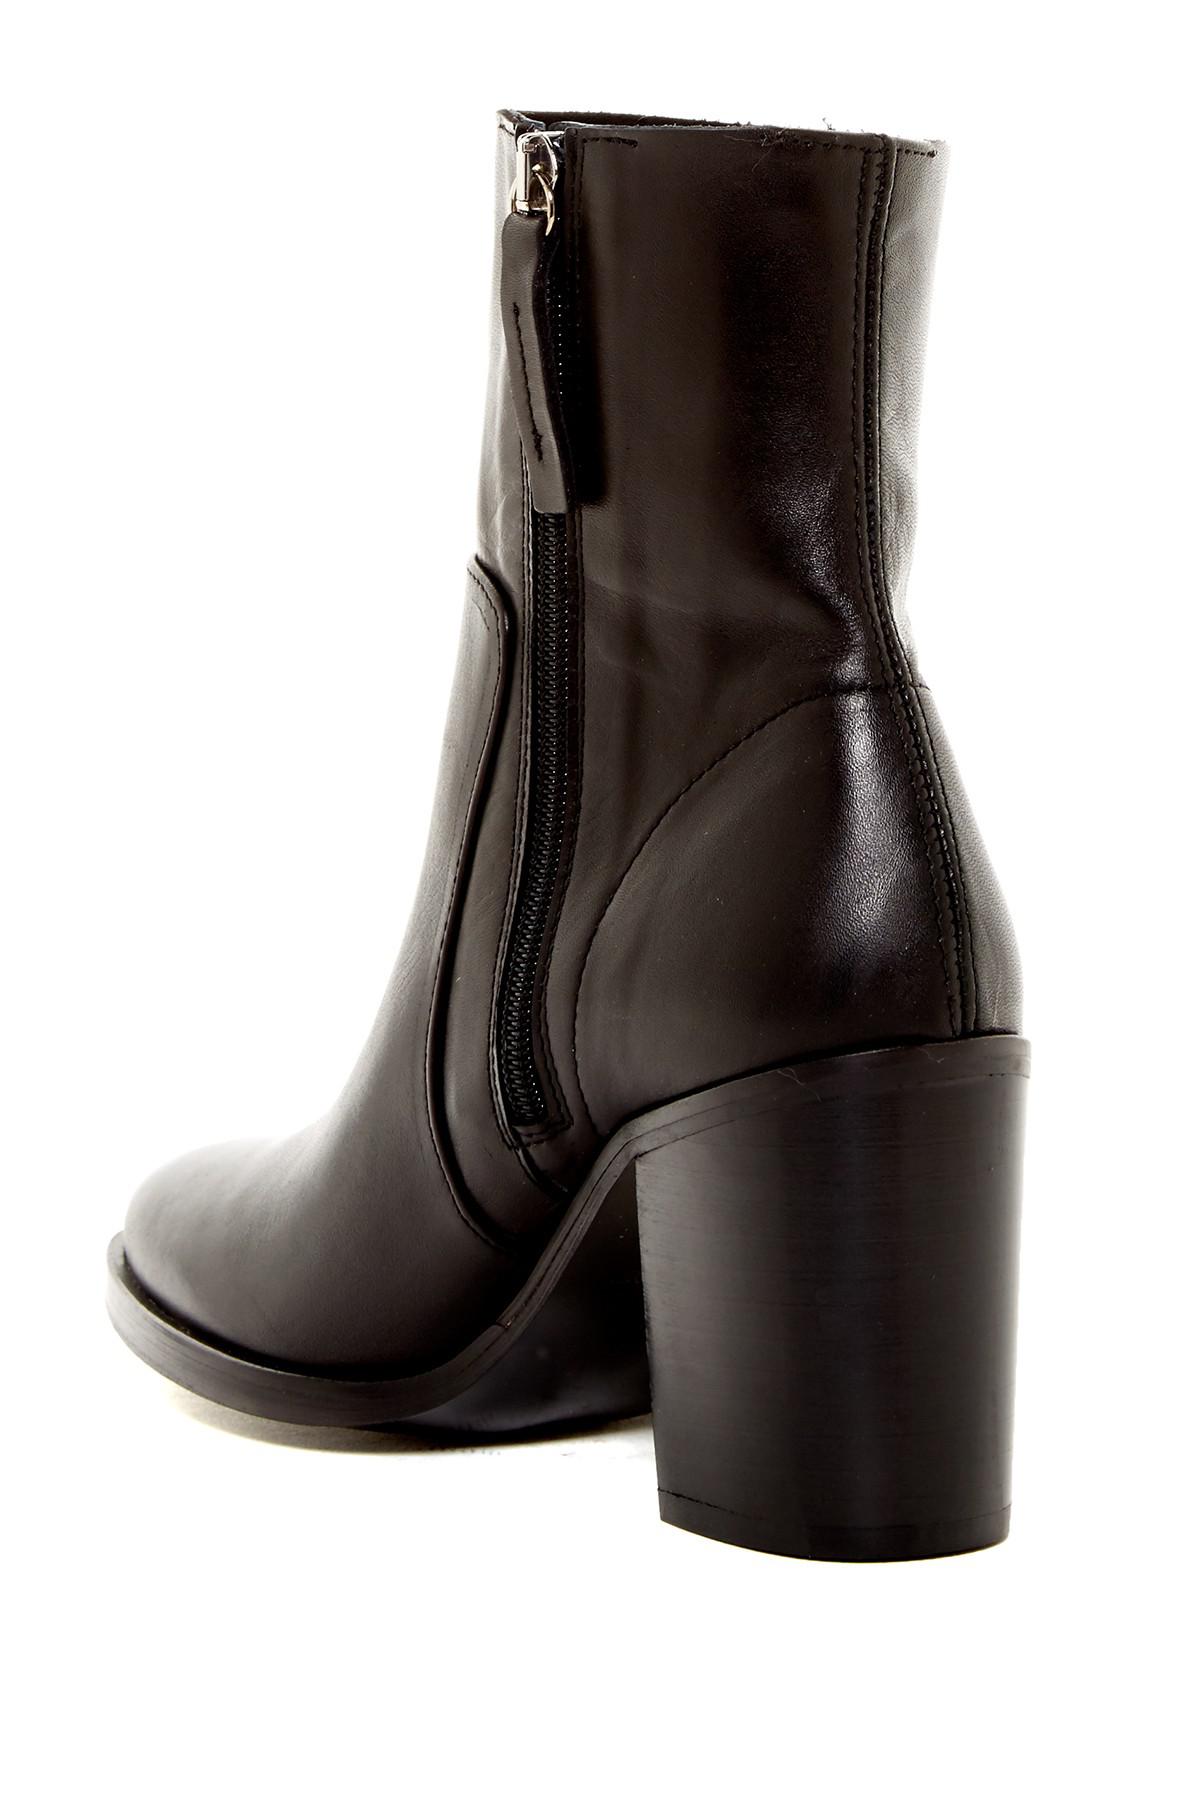 TOPSHOP Leather Million Sock Boot in Black - Lyst